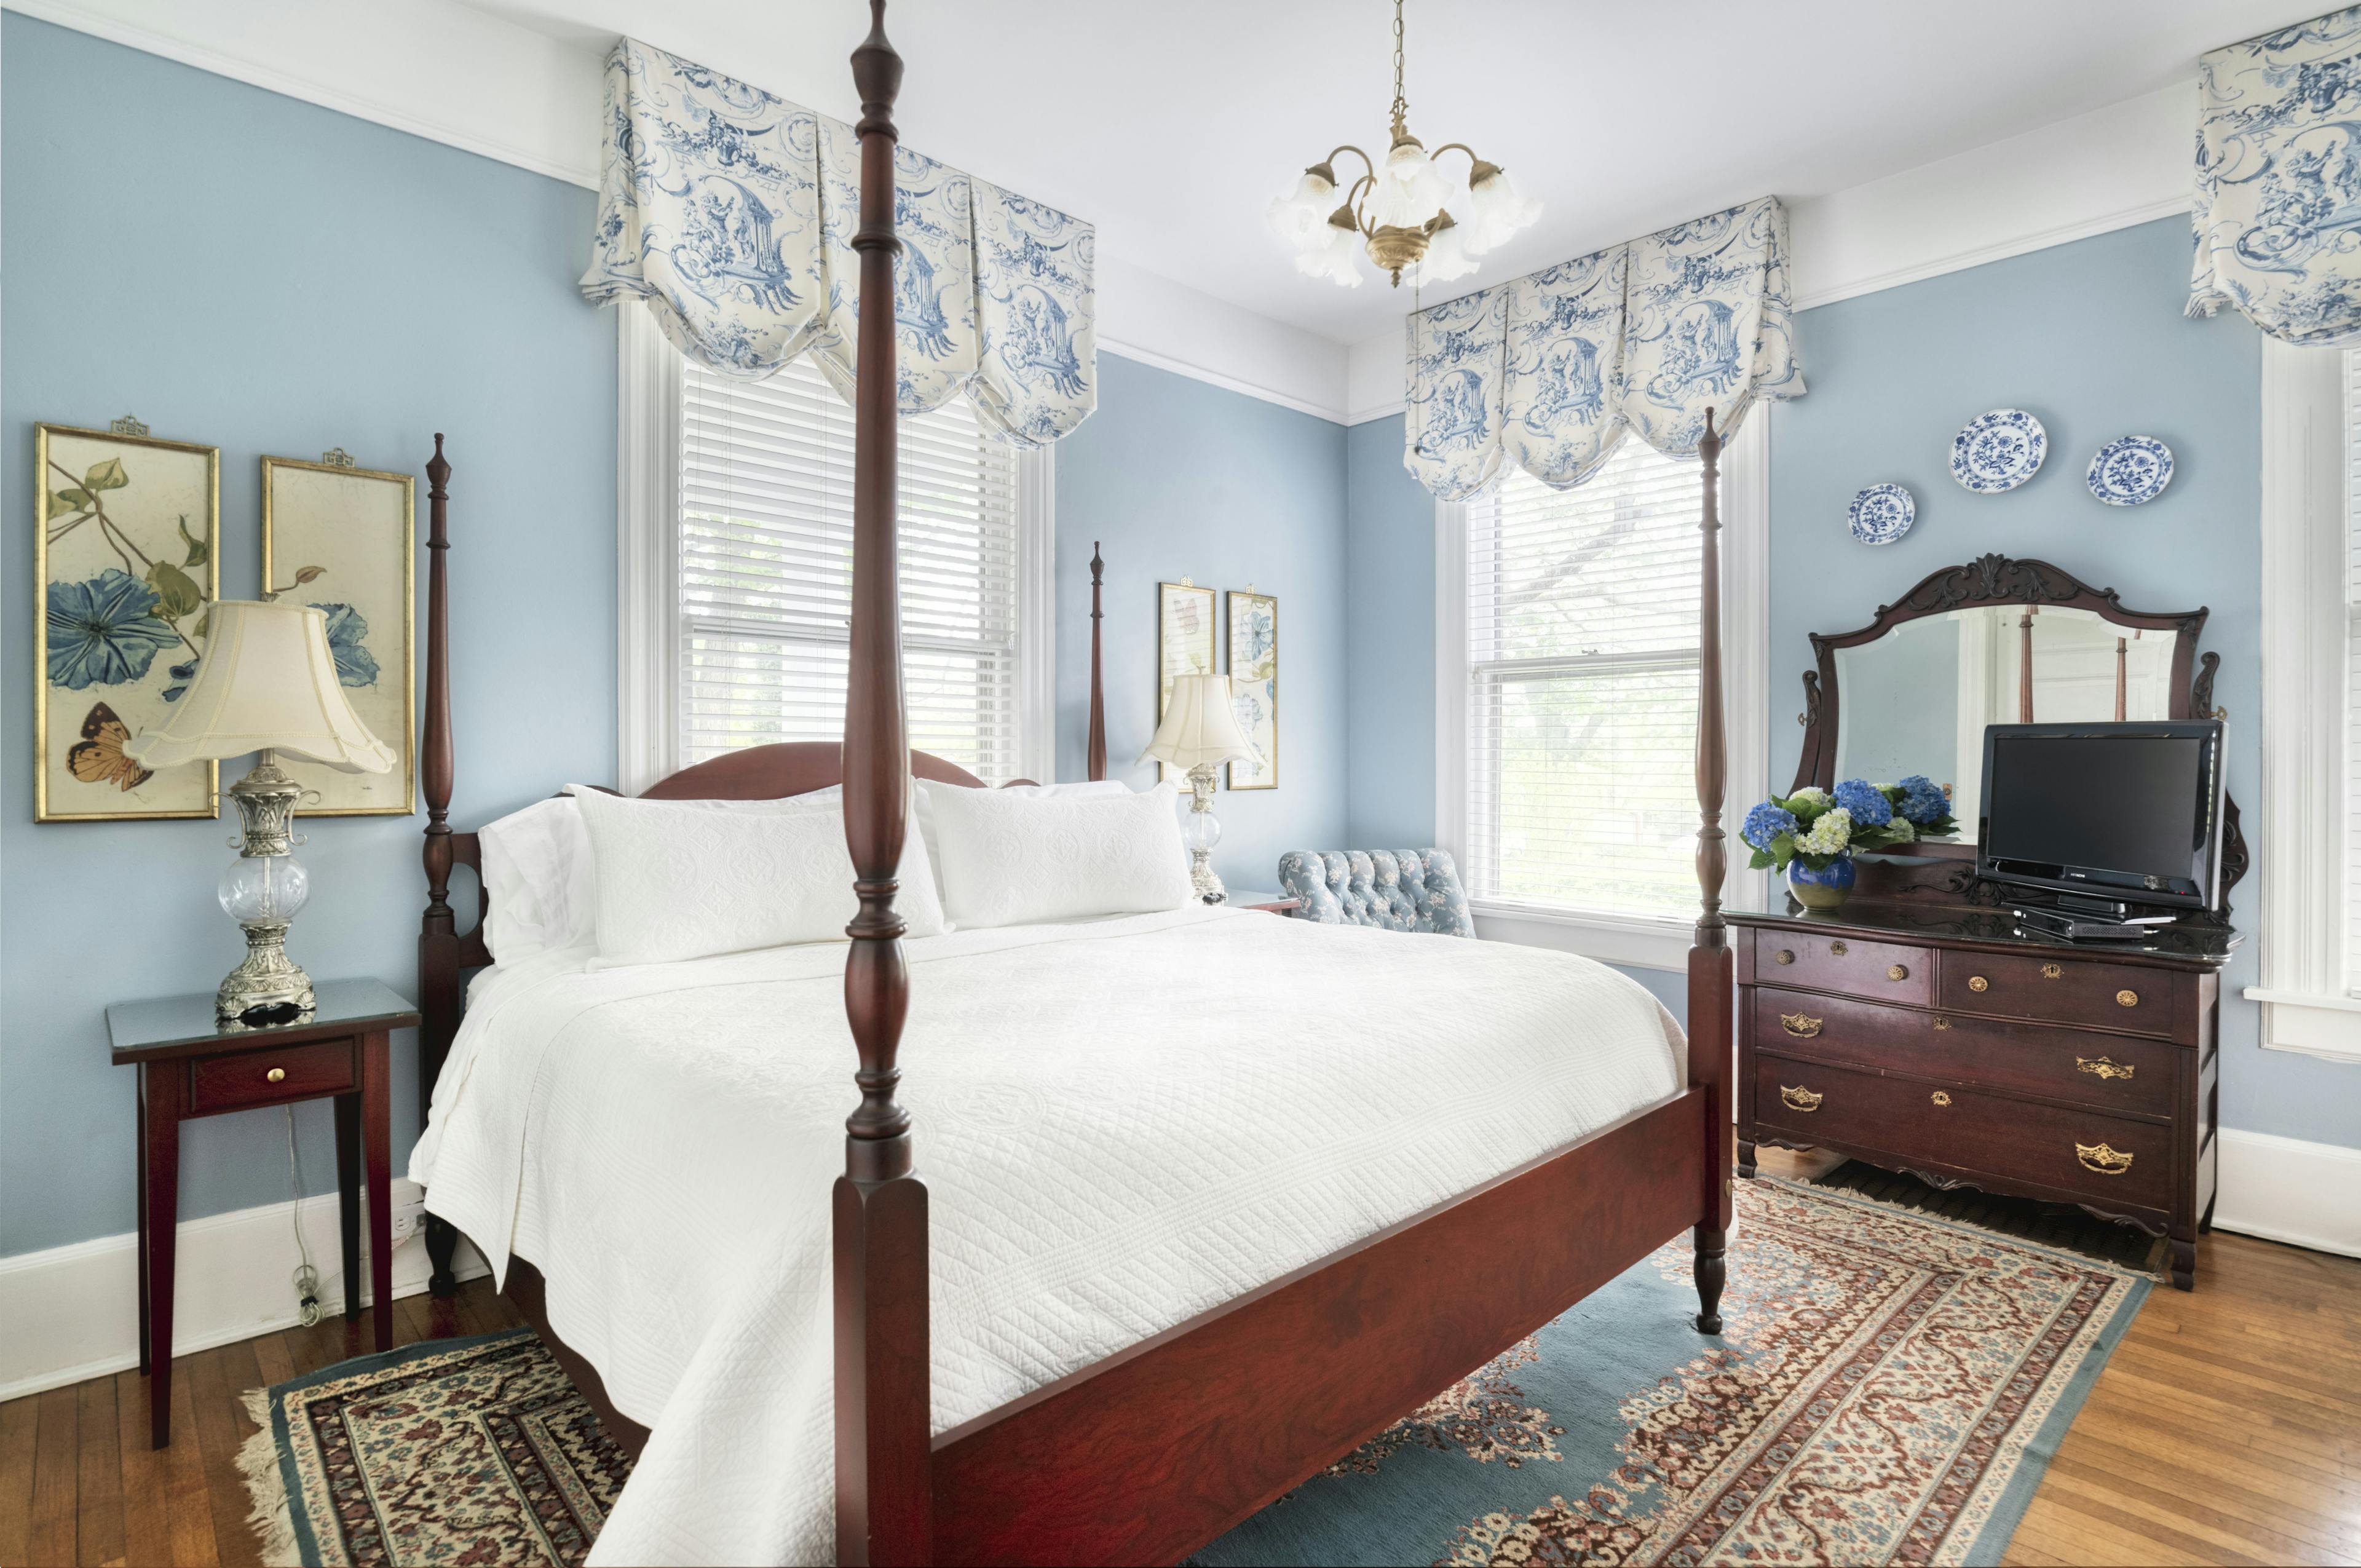 Victorian four post bed with white sheets. The room has hardwood floors and the walls are painted baby blue.